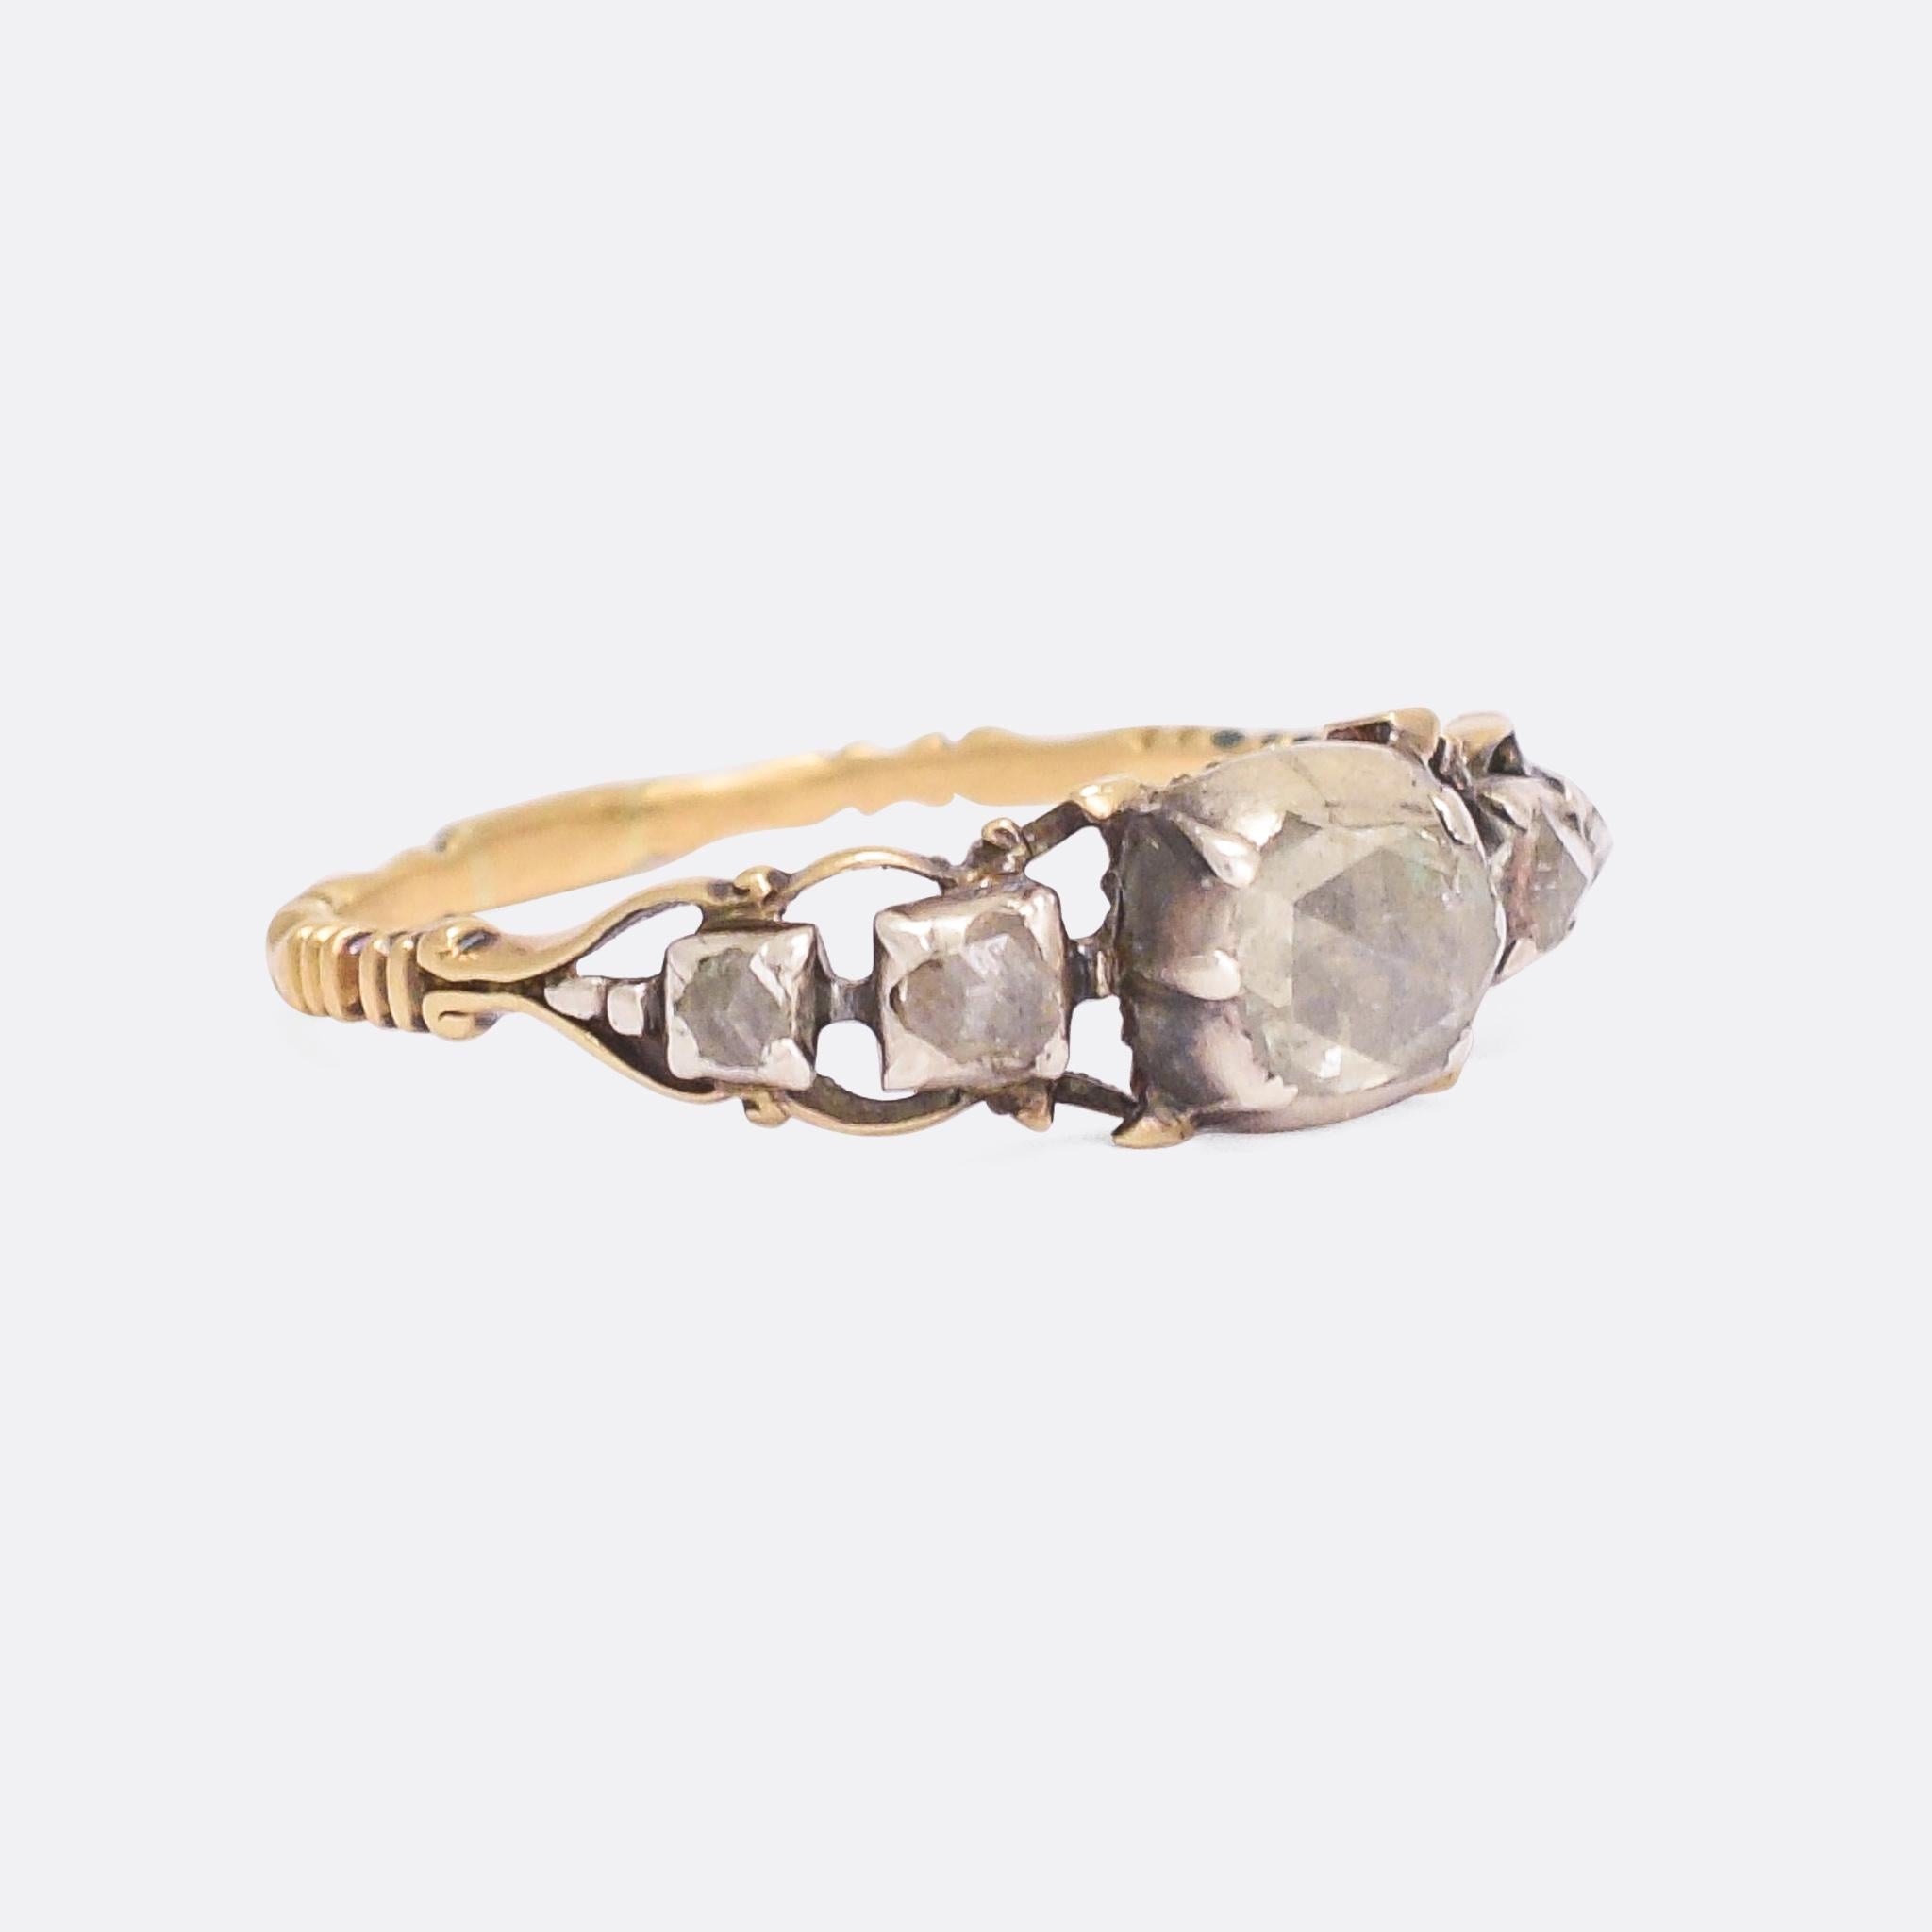 A stunning Georgian diamond ring dating from the late 18th Century, circa 1780. The highly domed rose cut stones rest in cut-down 